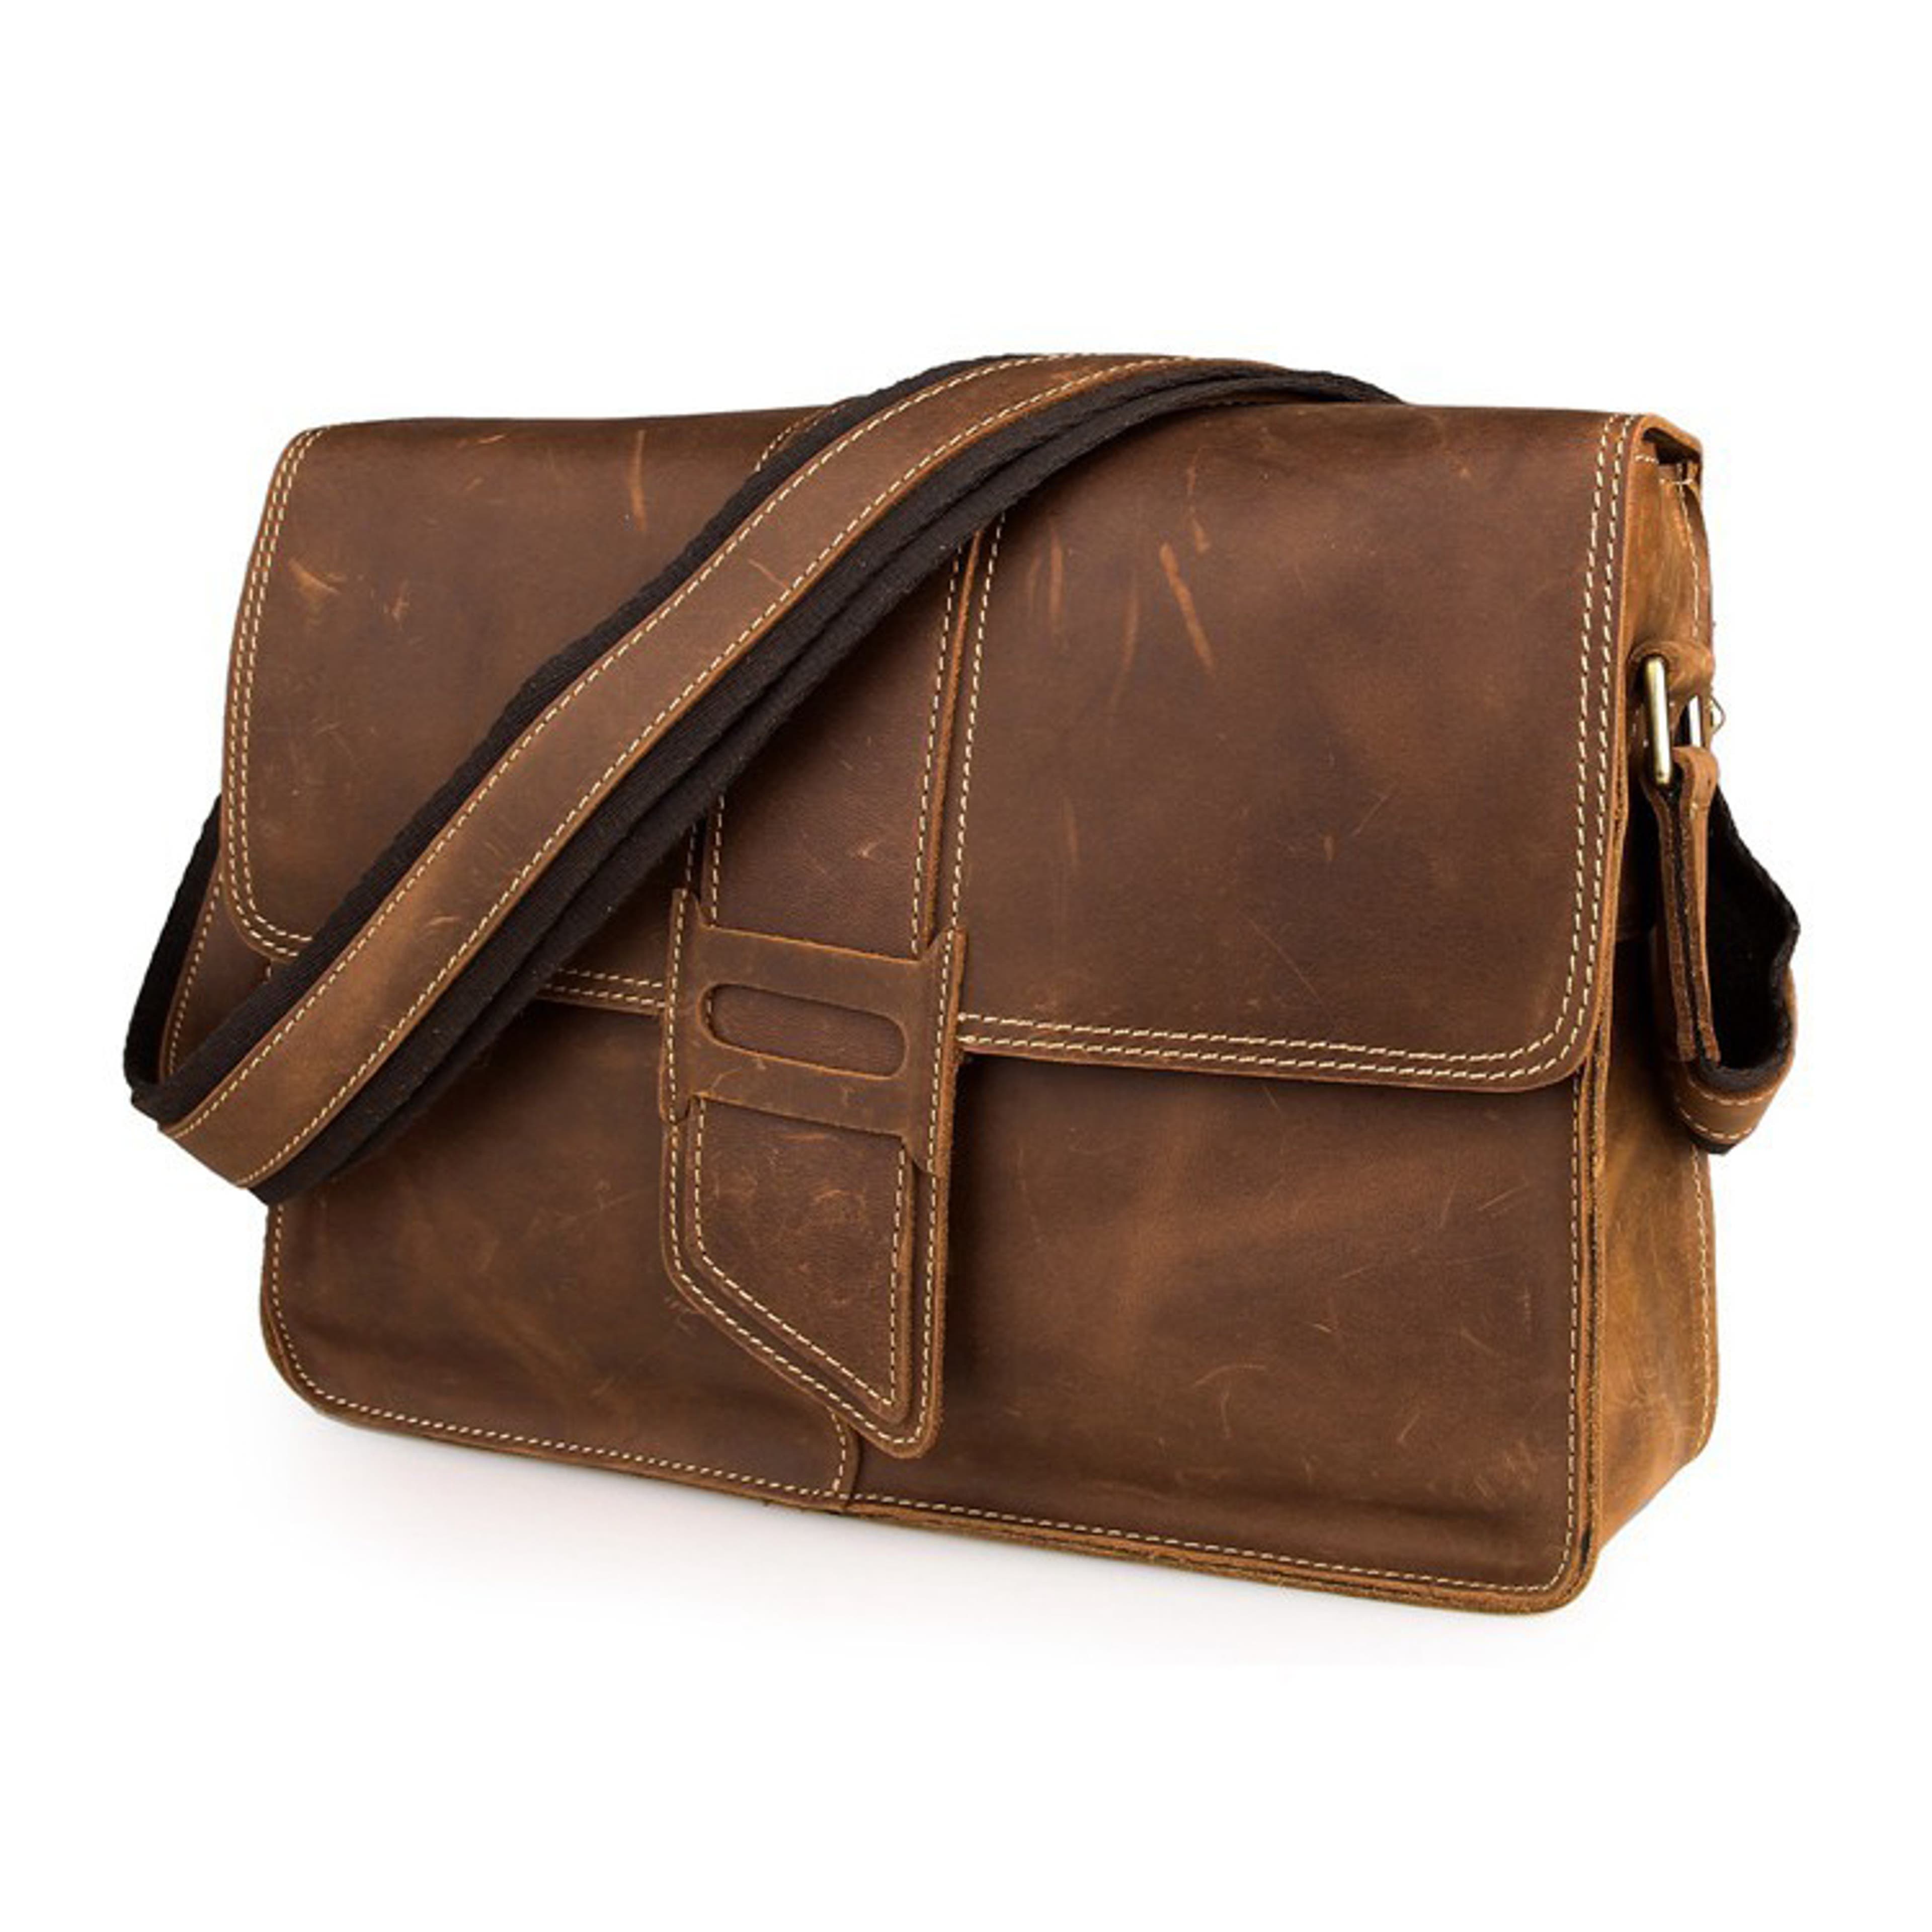 Scuffed Brown Leather Satchel